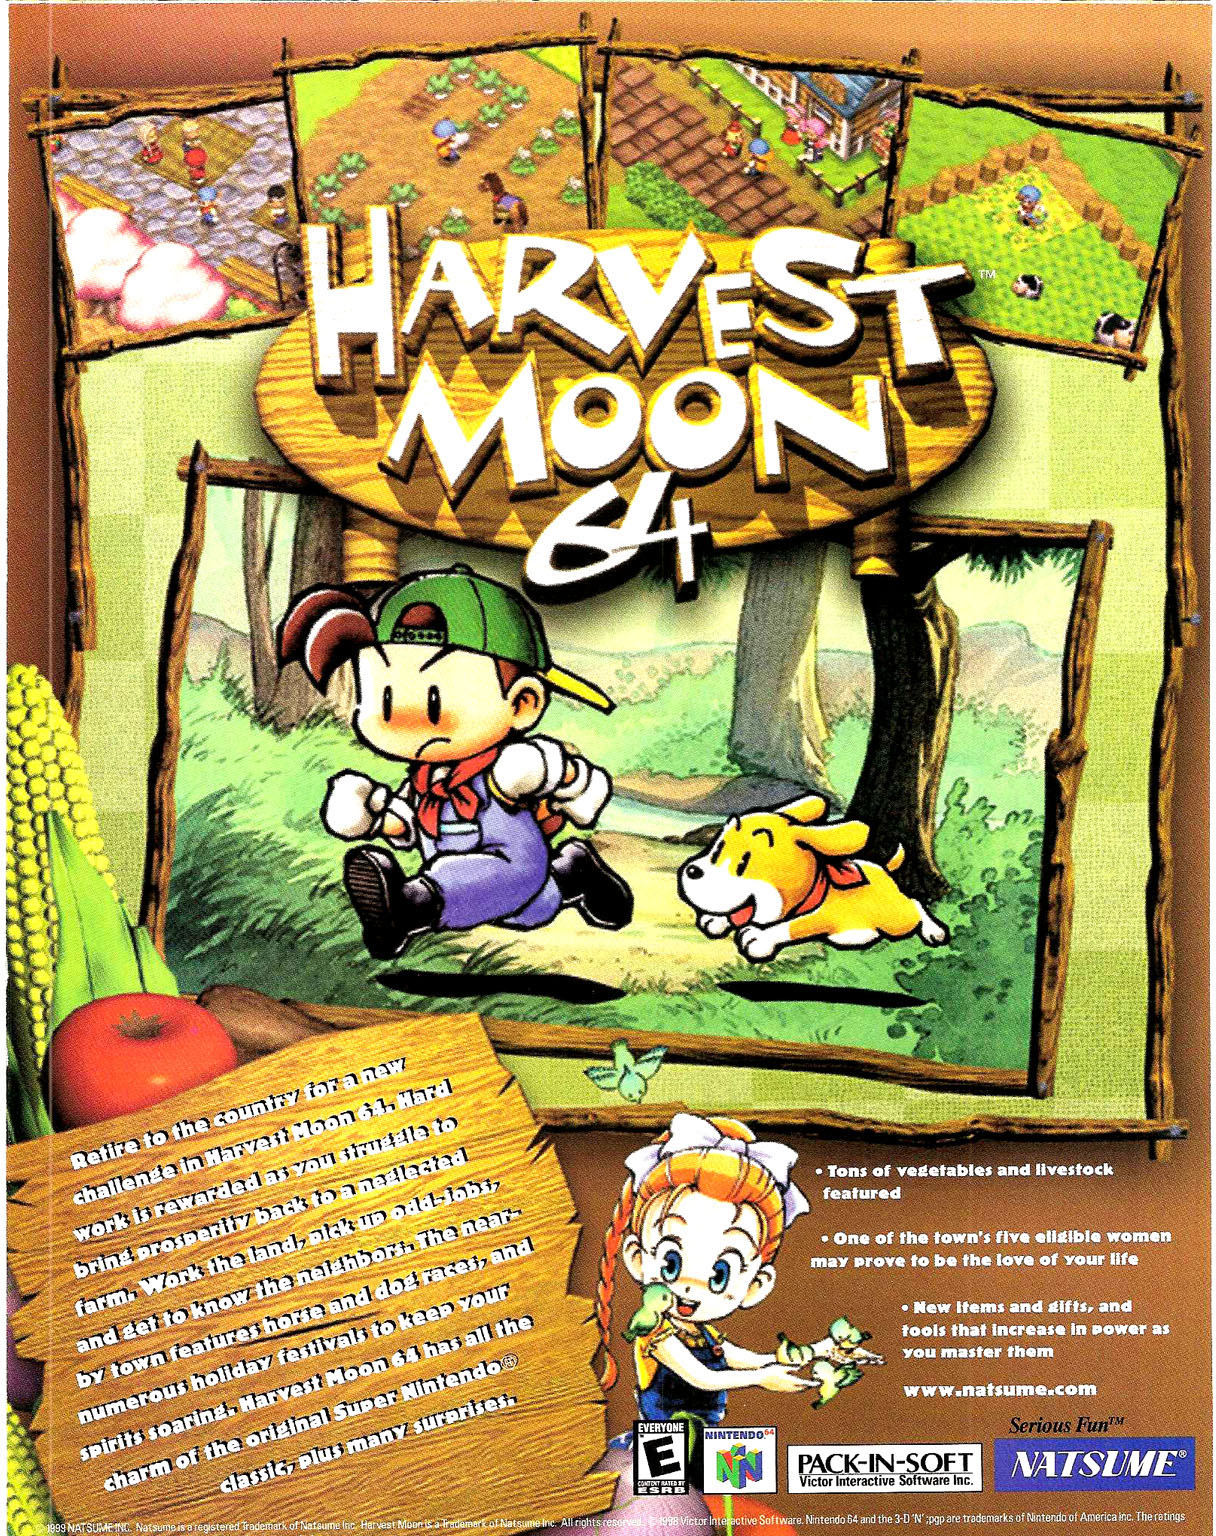 My favourite iteration of this series. Harvest Moon 64 puts you in control of a young farmer who is tasked with rebuilding and maintaining a farm, raising animals and starting […]